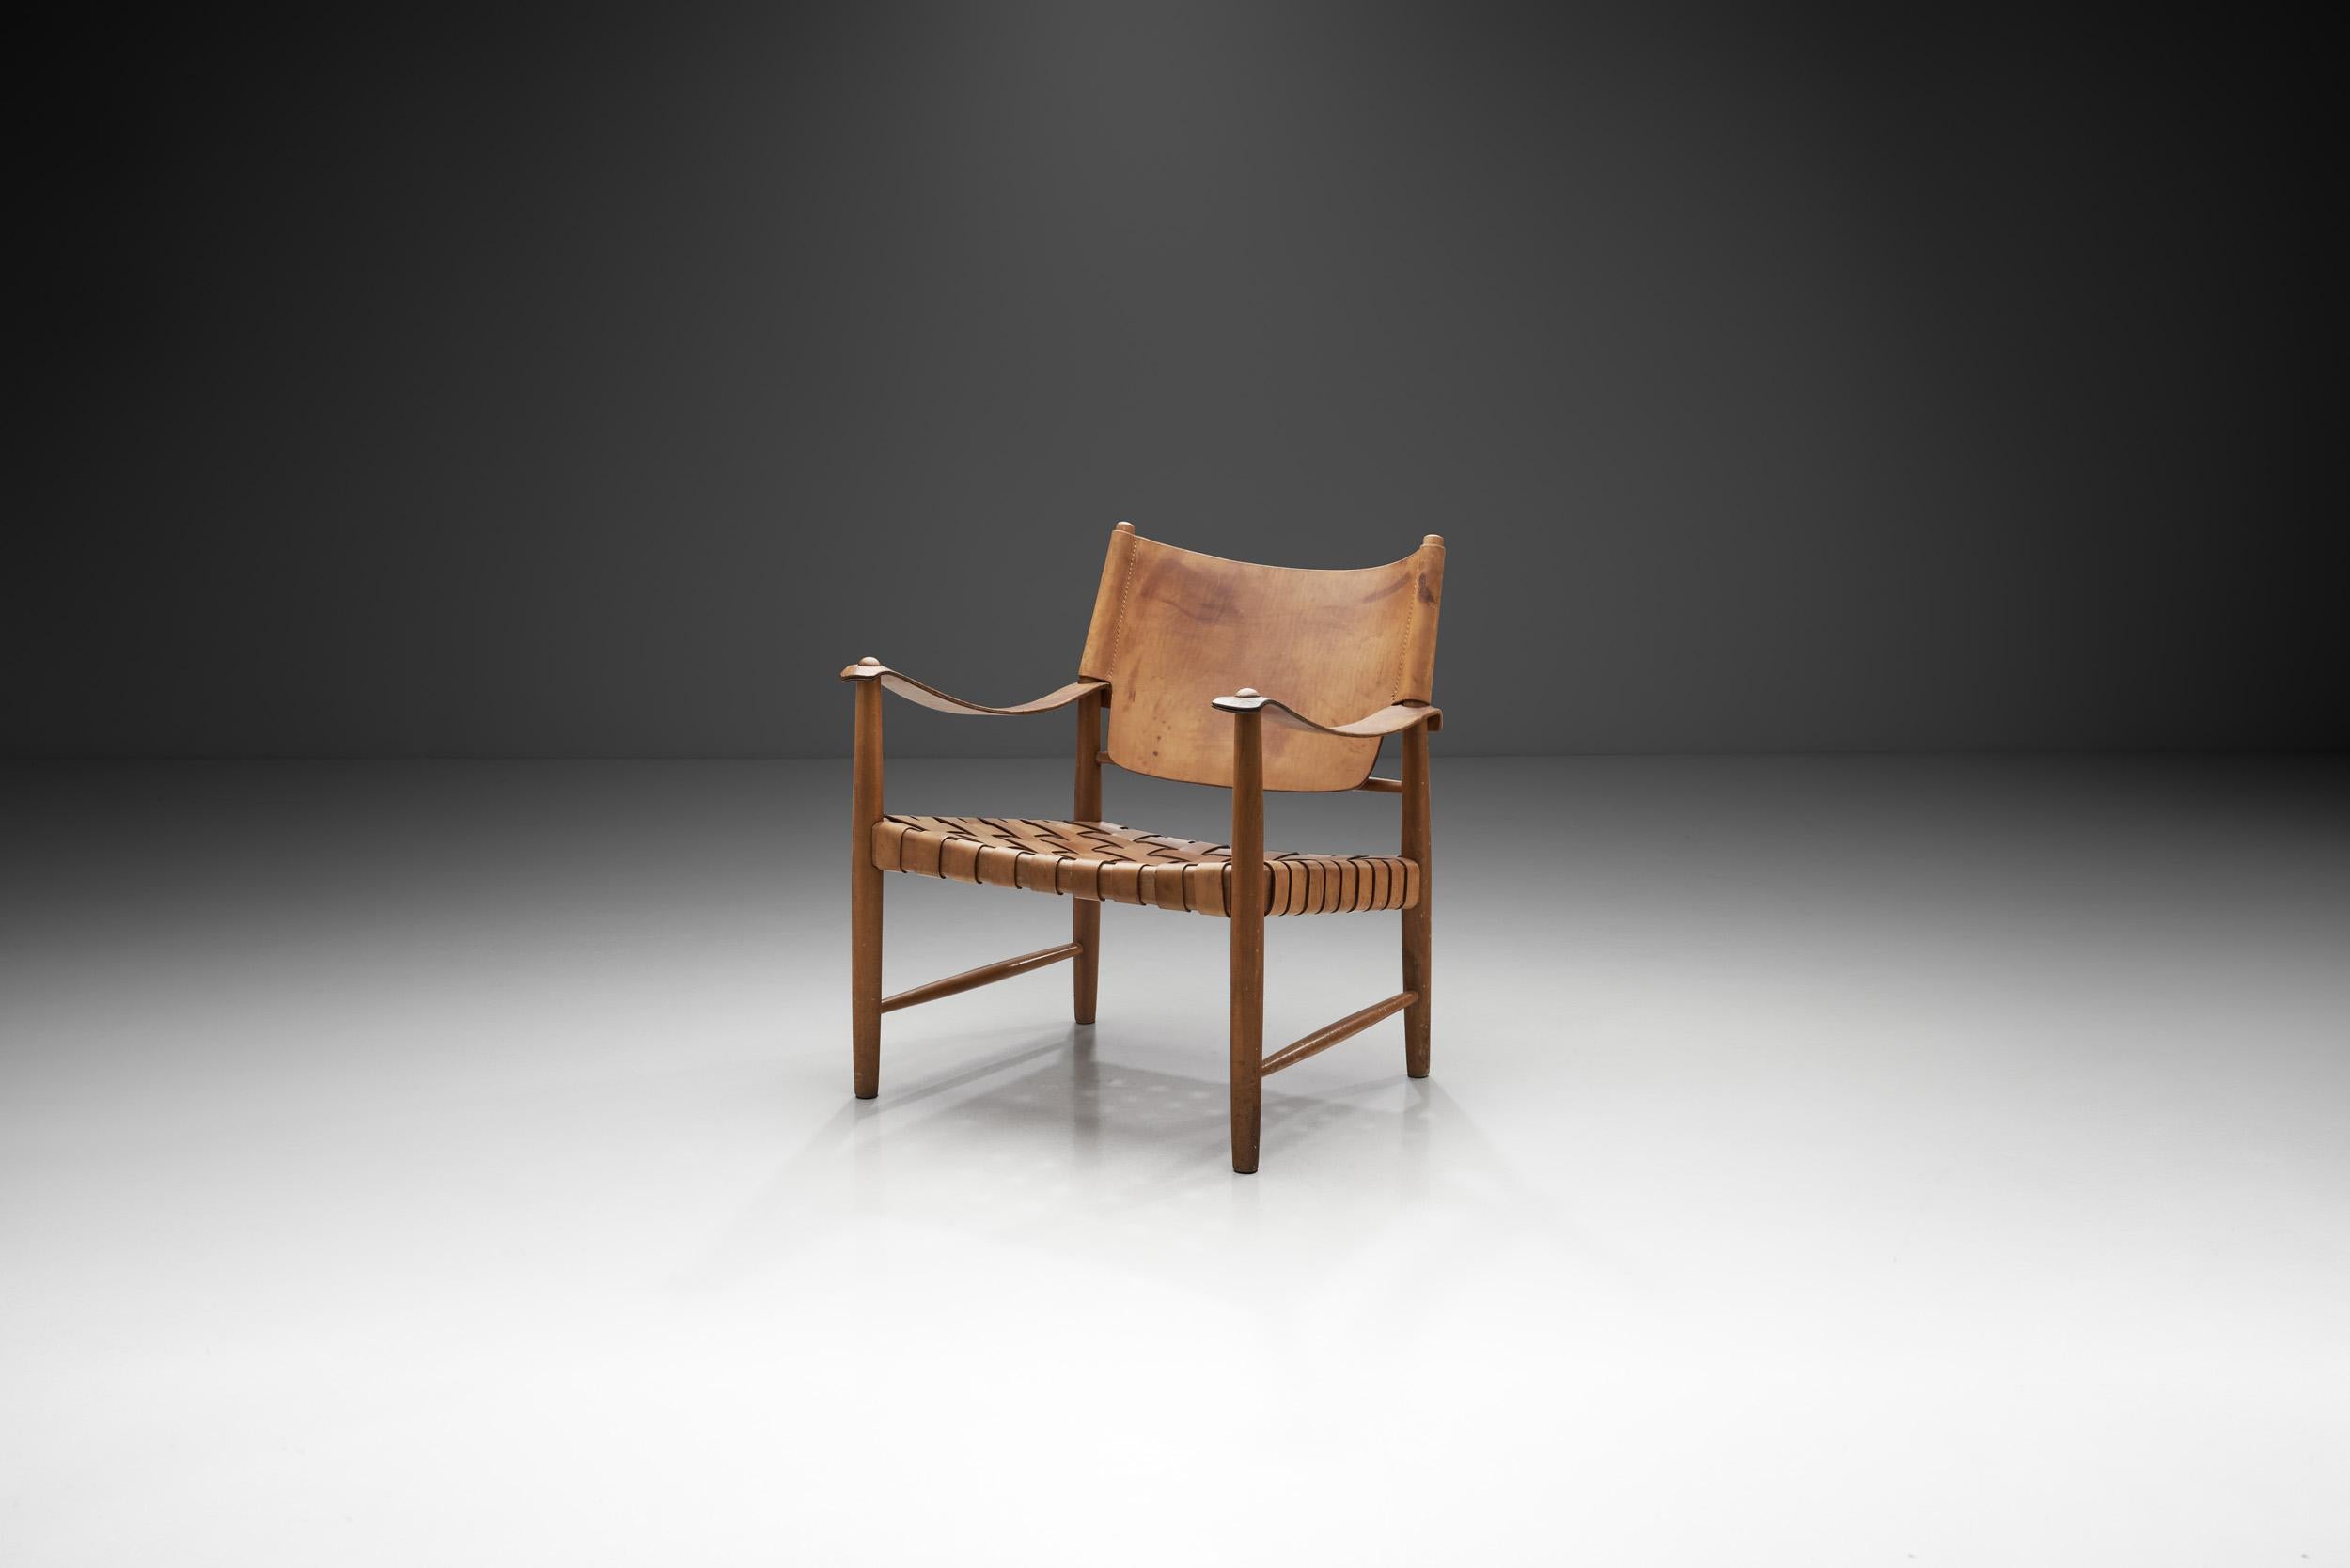 The design of this remarkable chair sis based on a long tradition of safari chairs. From Eileen Gray to Kaare Klint and Elias Svedberg, a lot of great designers have made versions of this self-assembled seating, which probably finds it origin in the